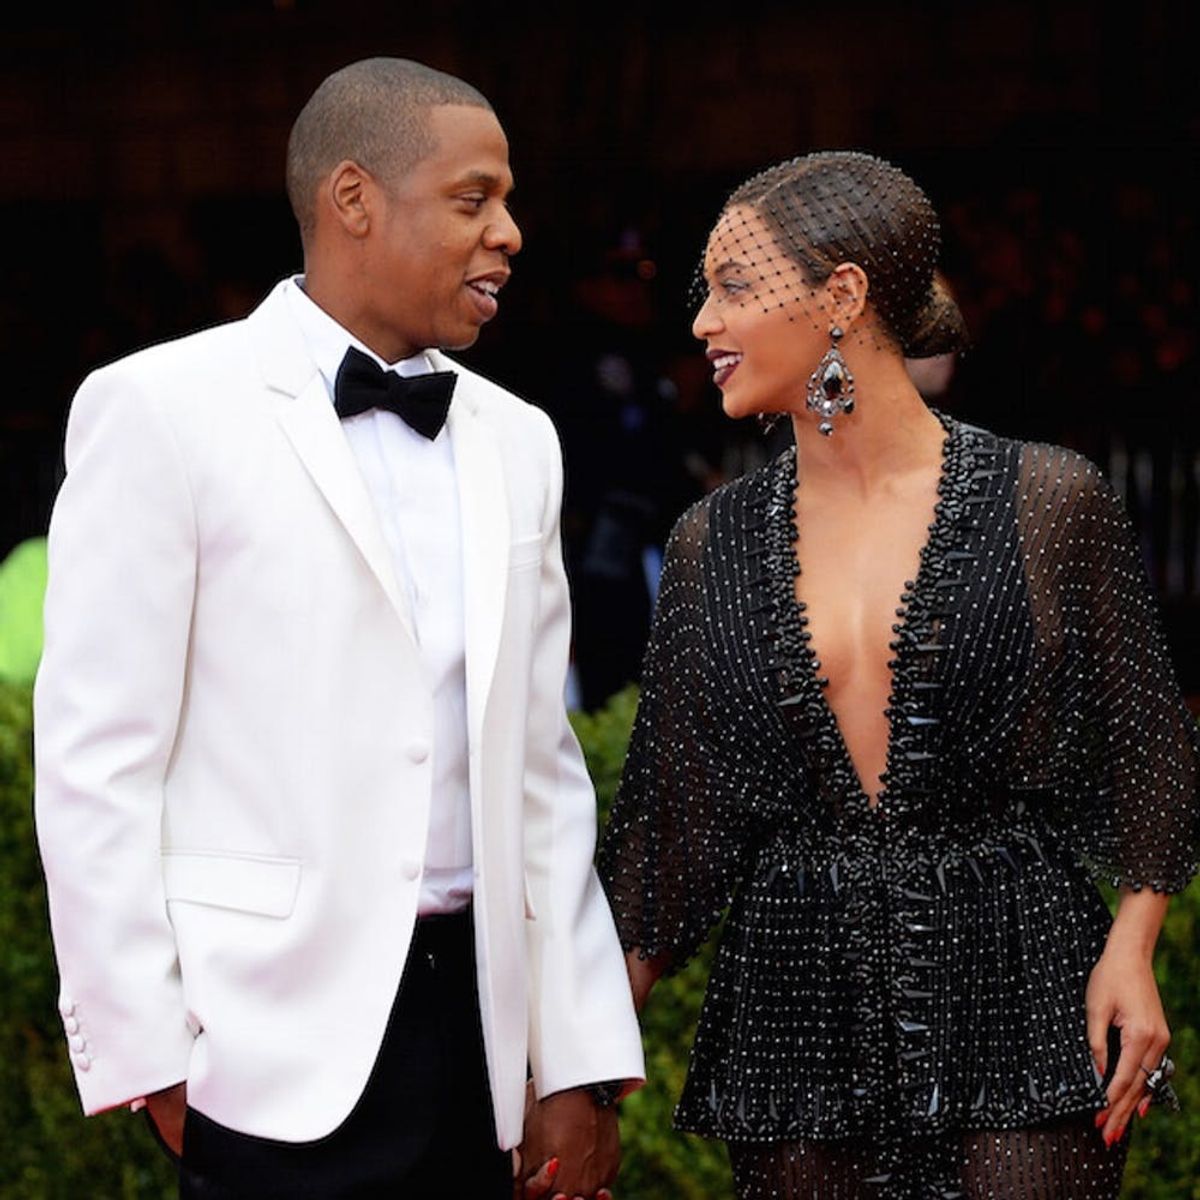 Beyoncé and Jay-Z’s Twins’ Names May Have Just Been Revealed!